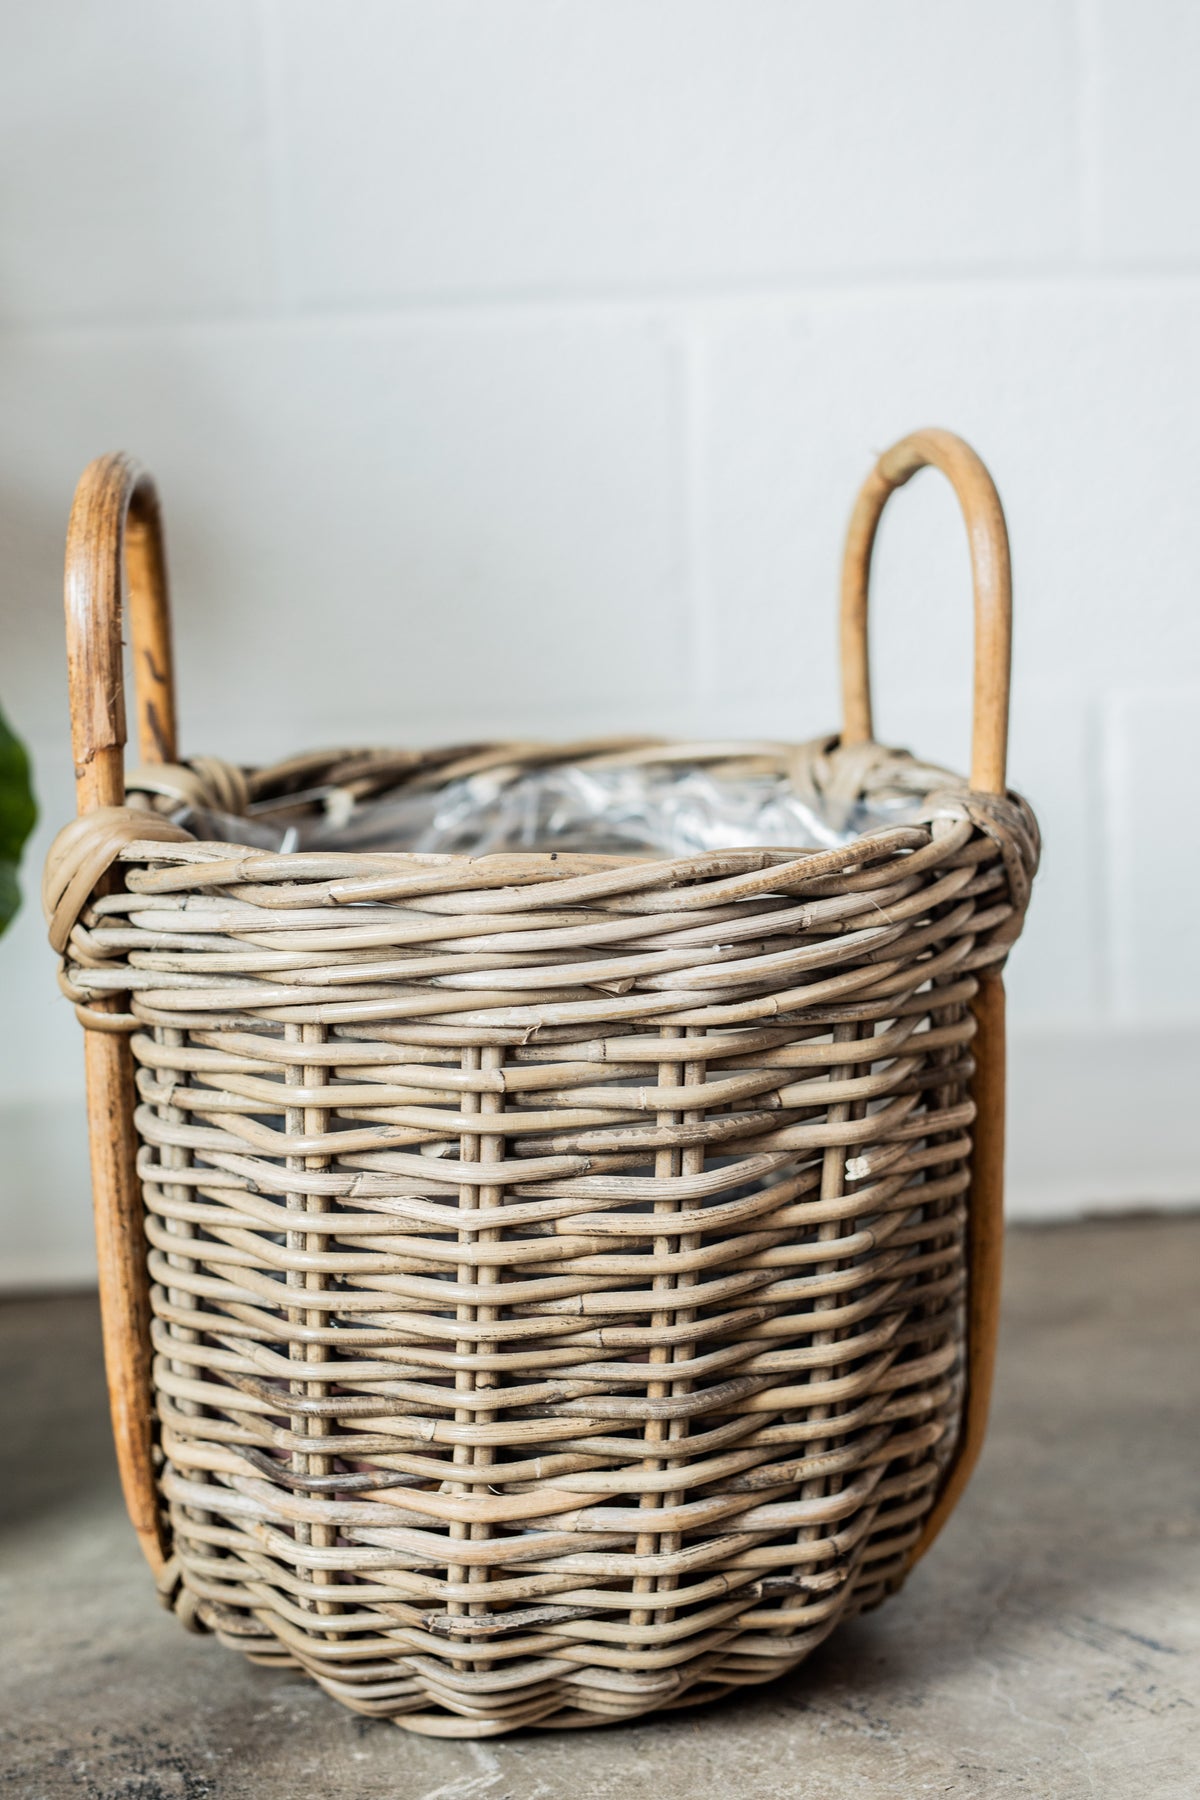 Lined Rattan Baskets